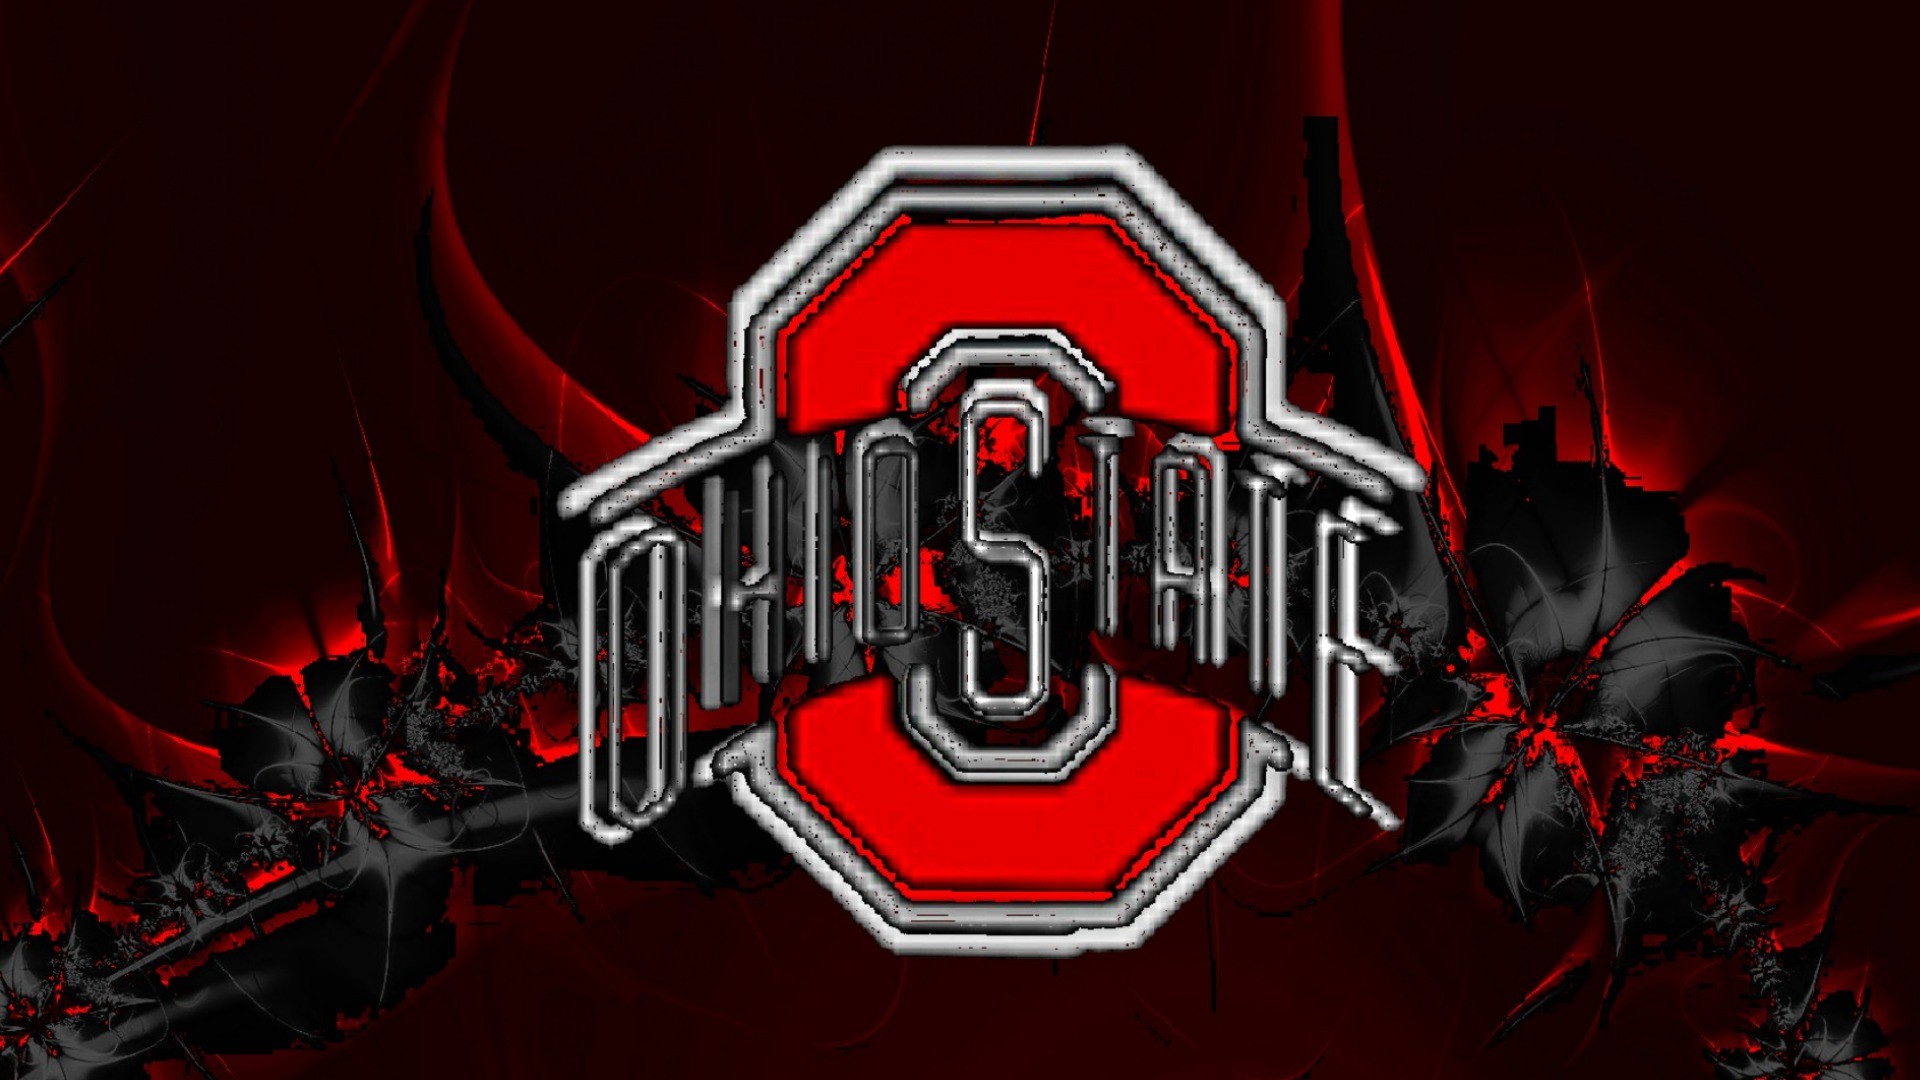 Ohio State Football Background Wallpaper | HD Wallpapers | Pinterest | Hd  wallpaper and Wallpaper